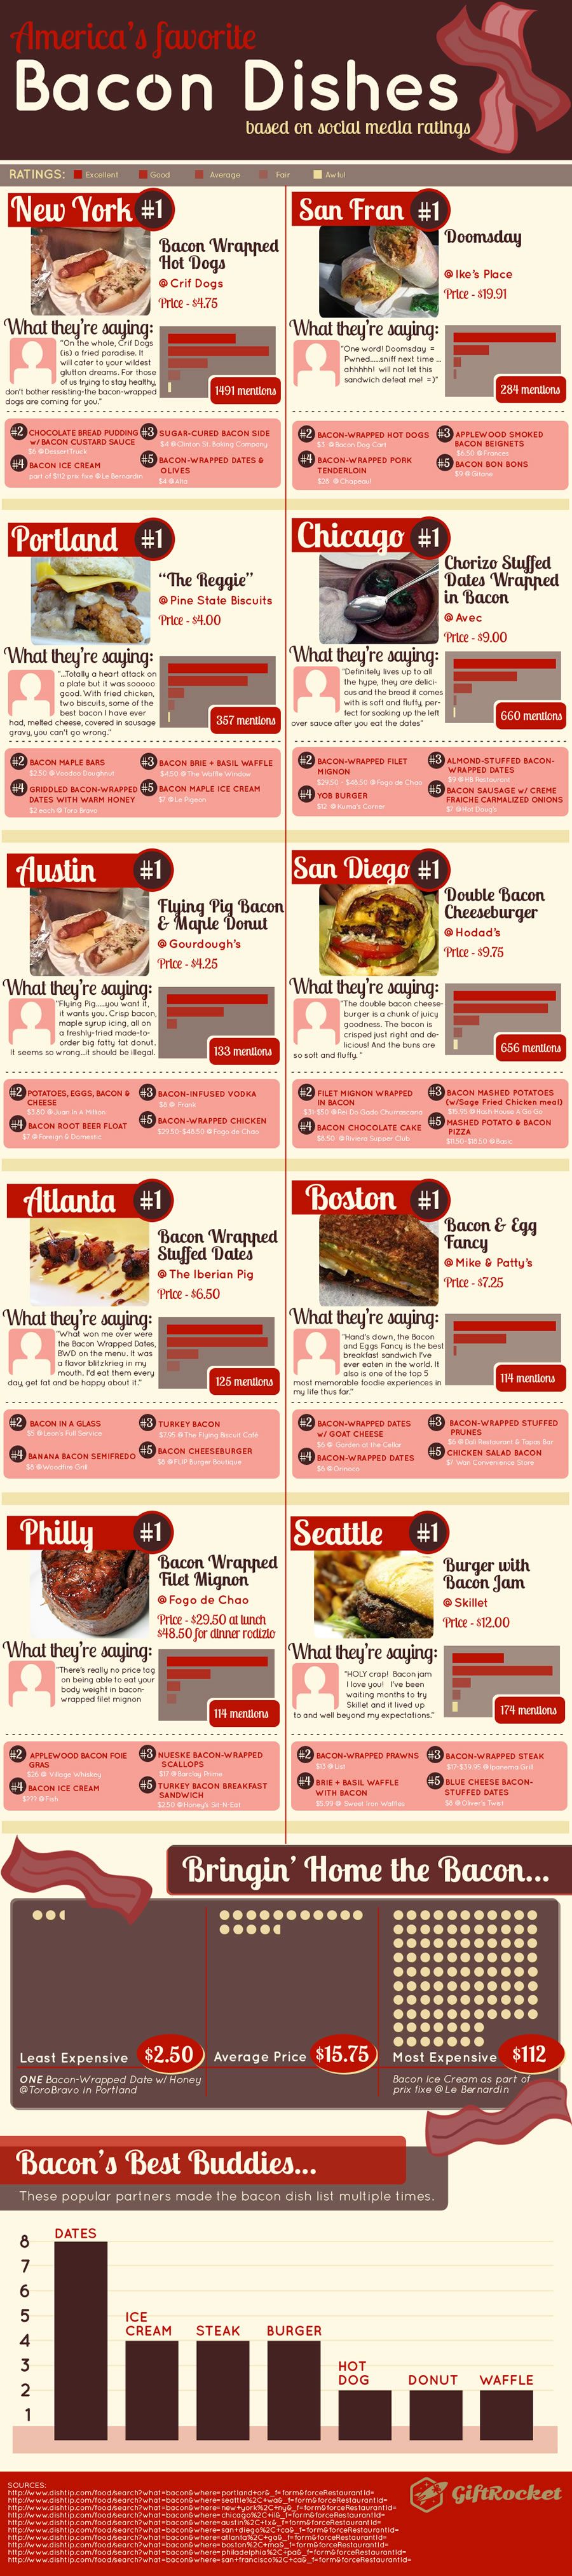 bacon-dishes-infographic-full